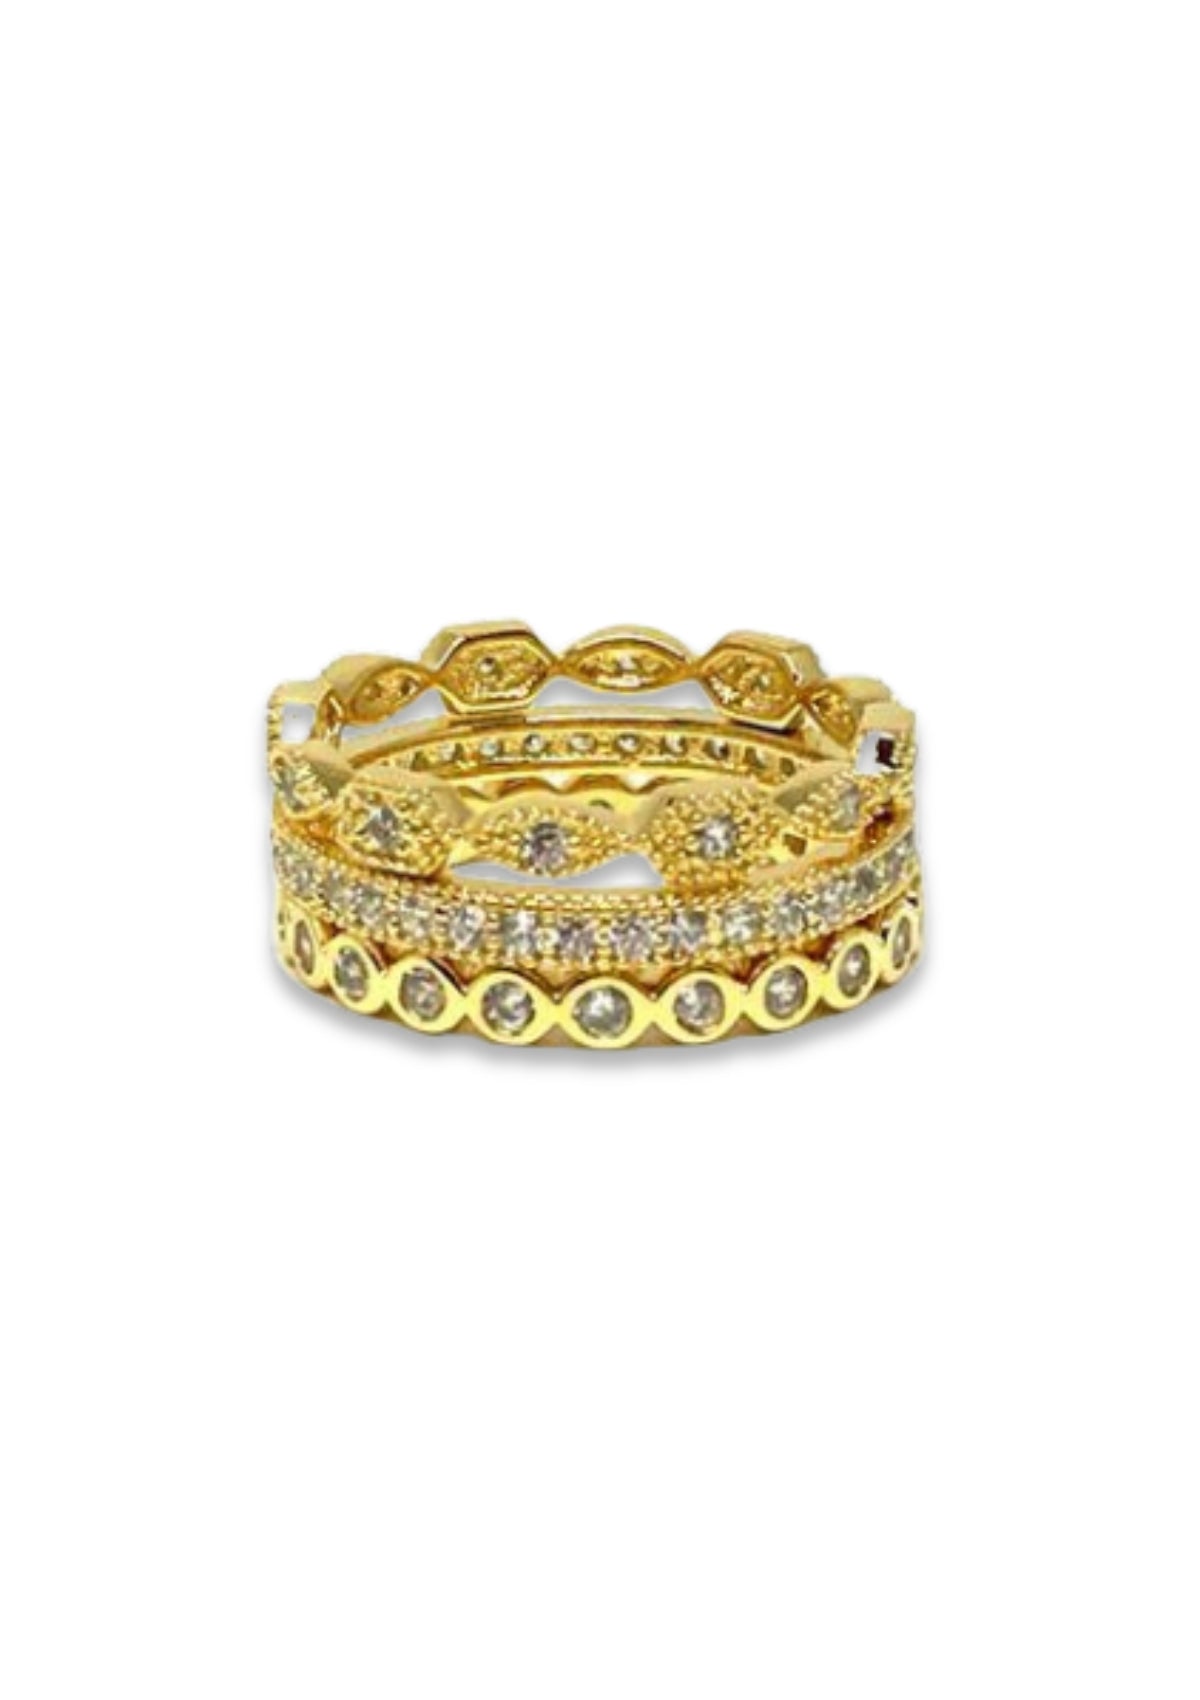 3 rings stacked together that creates a large gold ring look.